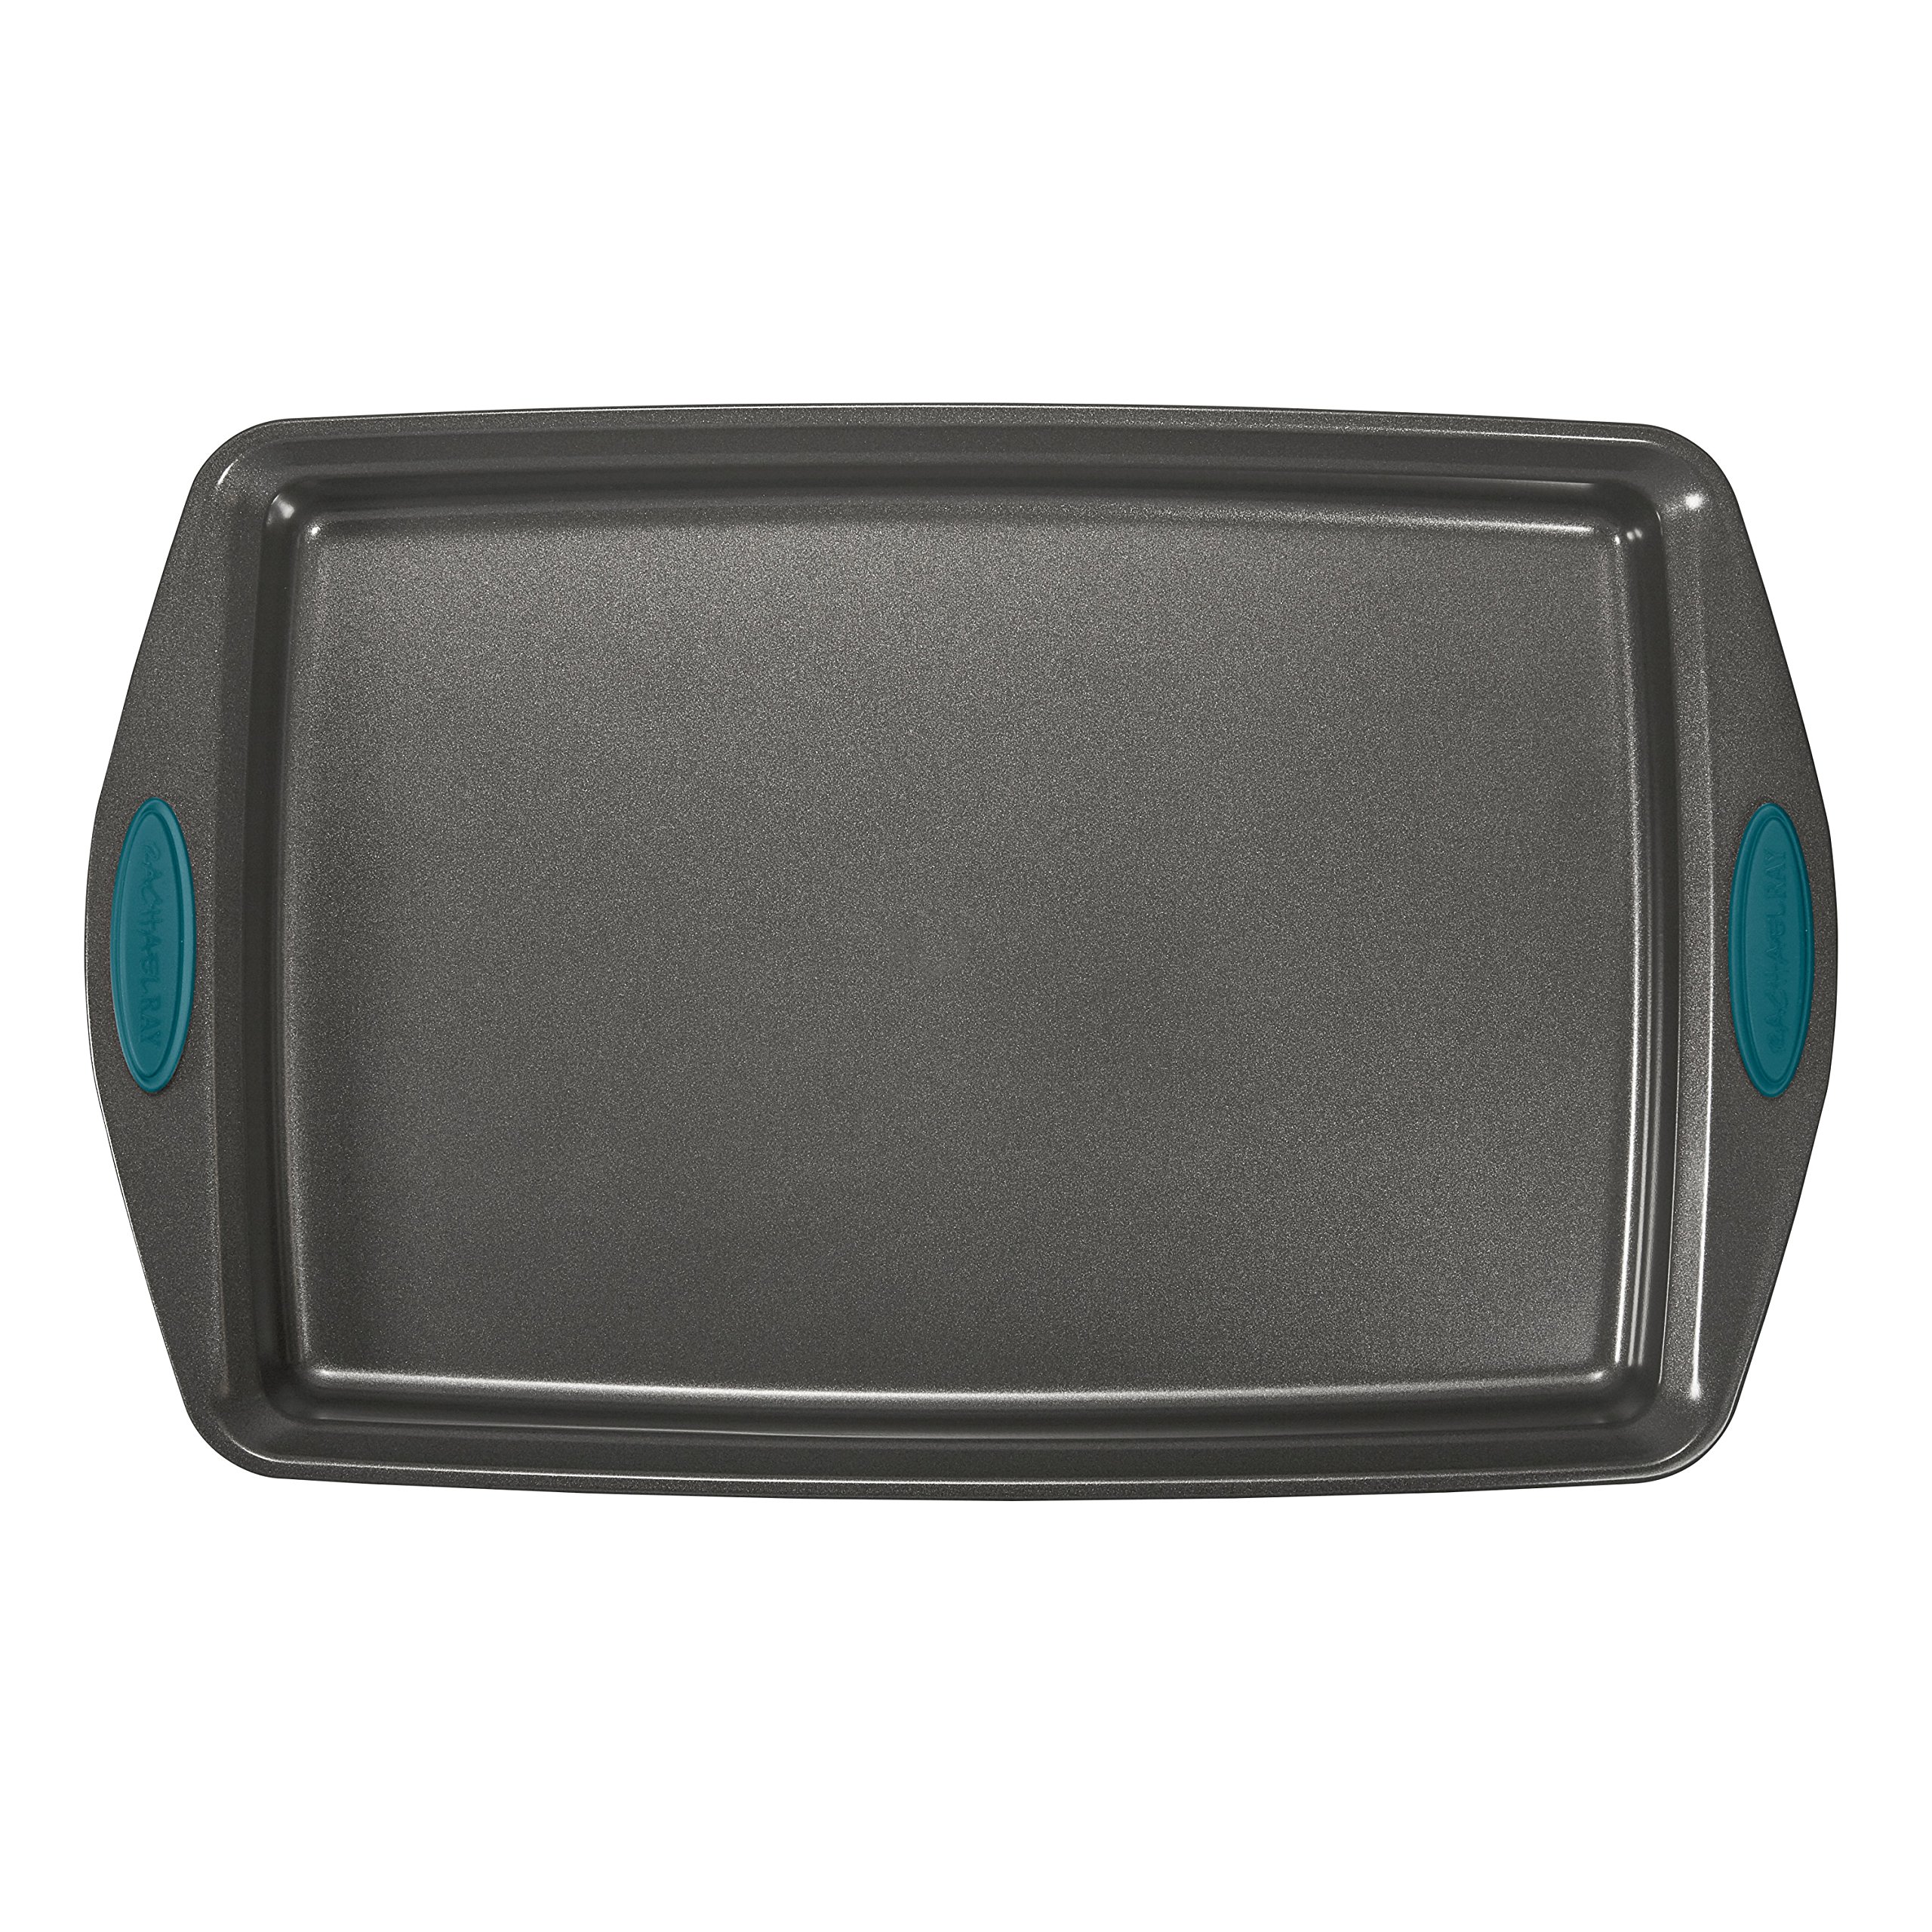 Rachael Ray Bakeware Nonstick Cookie Pan Set, 3-Piece, Gray with Marine Blue Grips